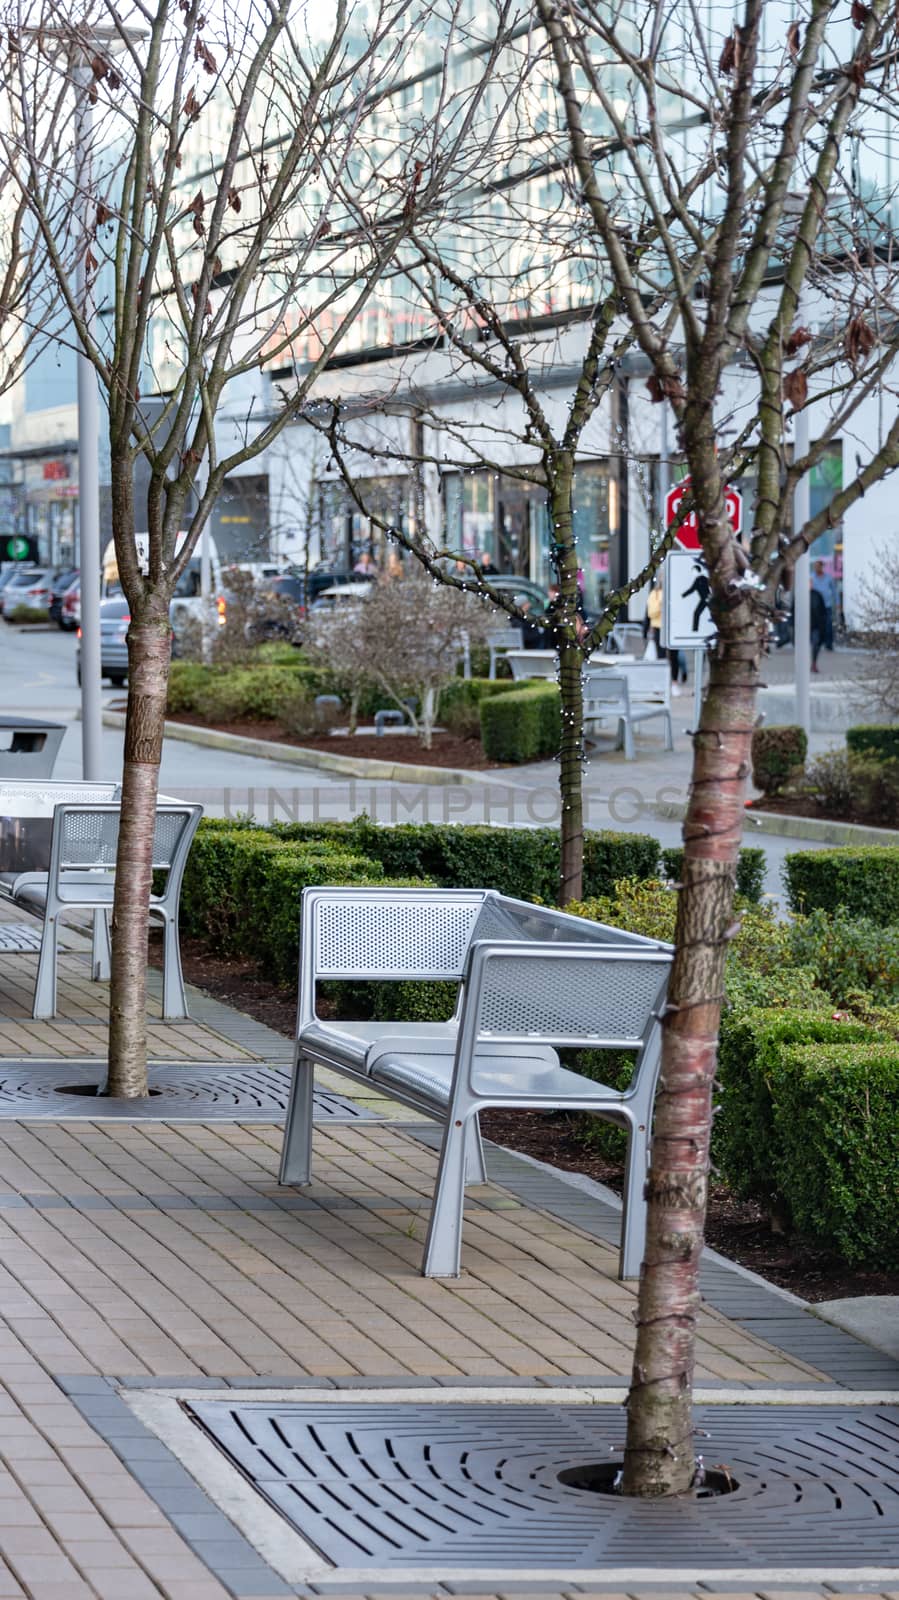 Paved walkway in a city with metal bench and highlighted trees on side.